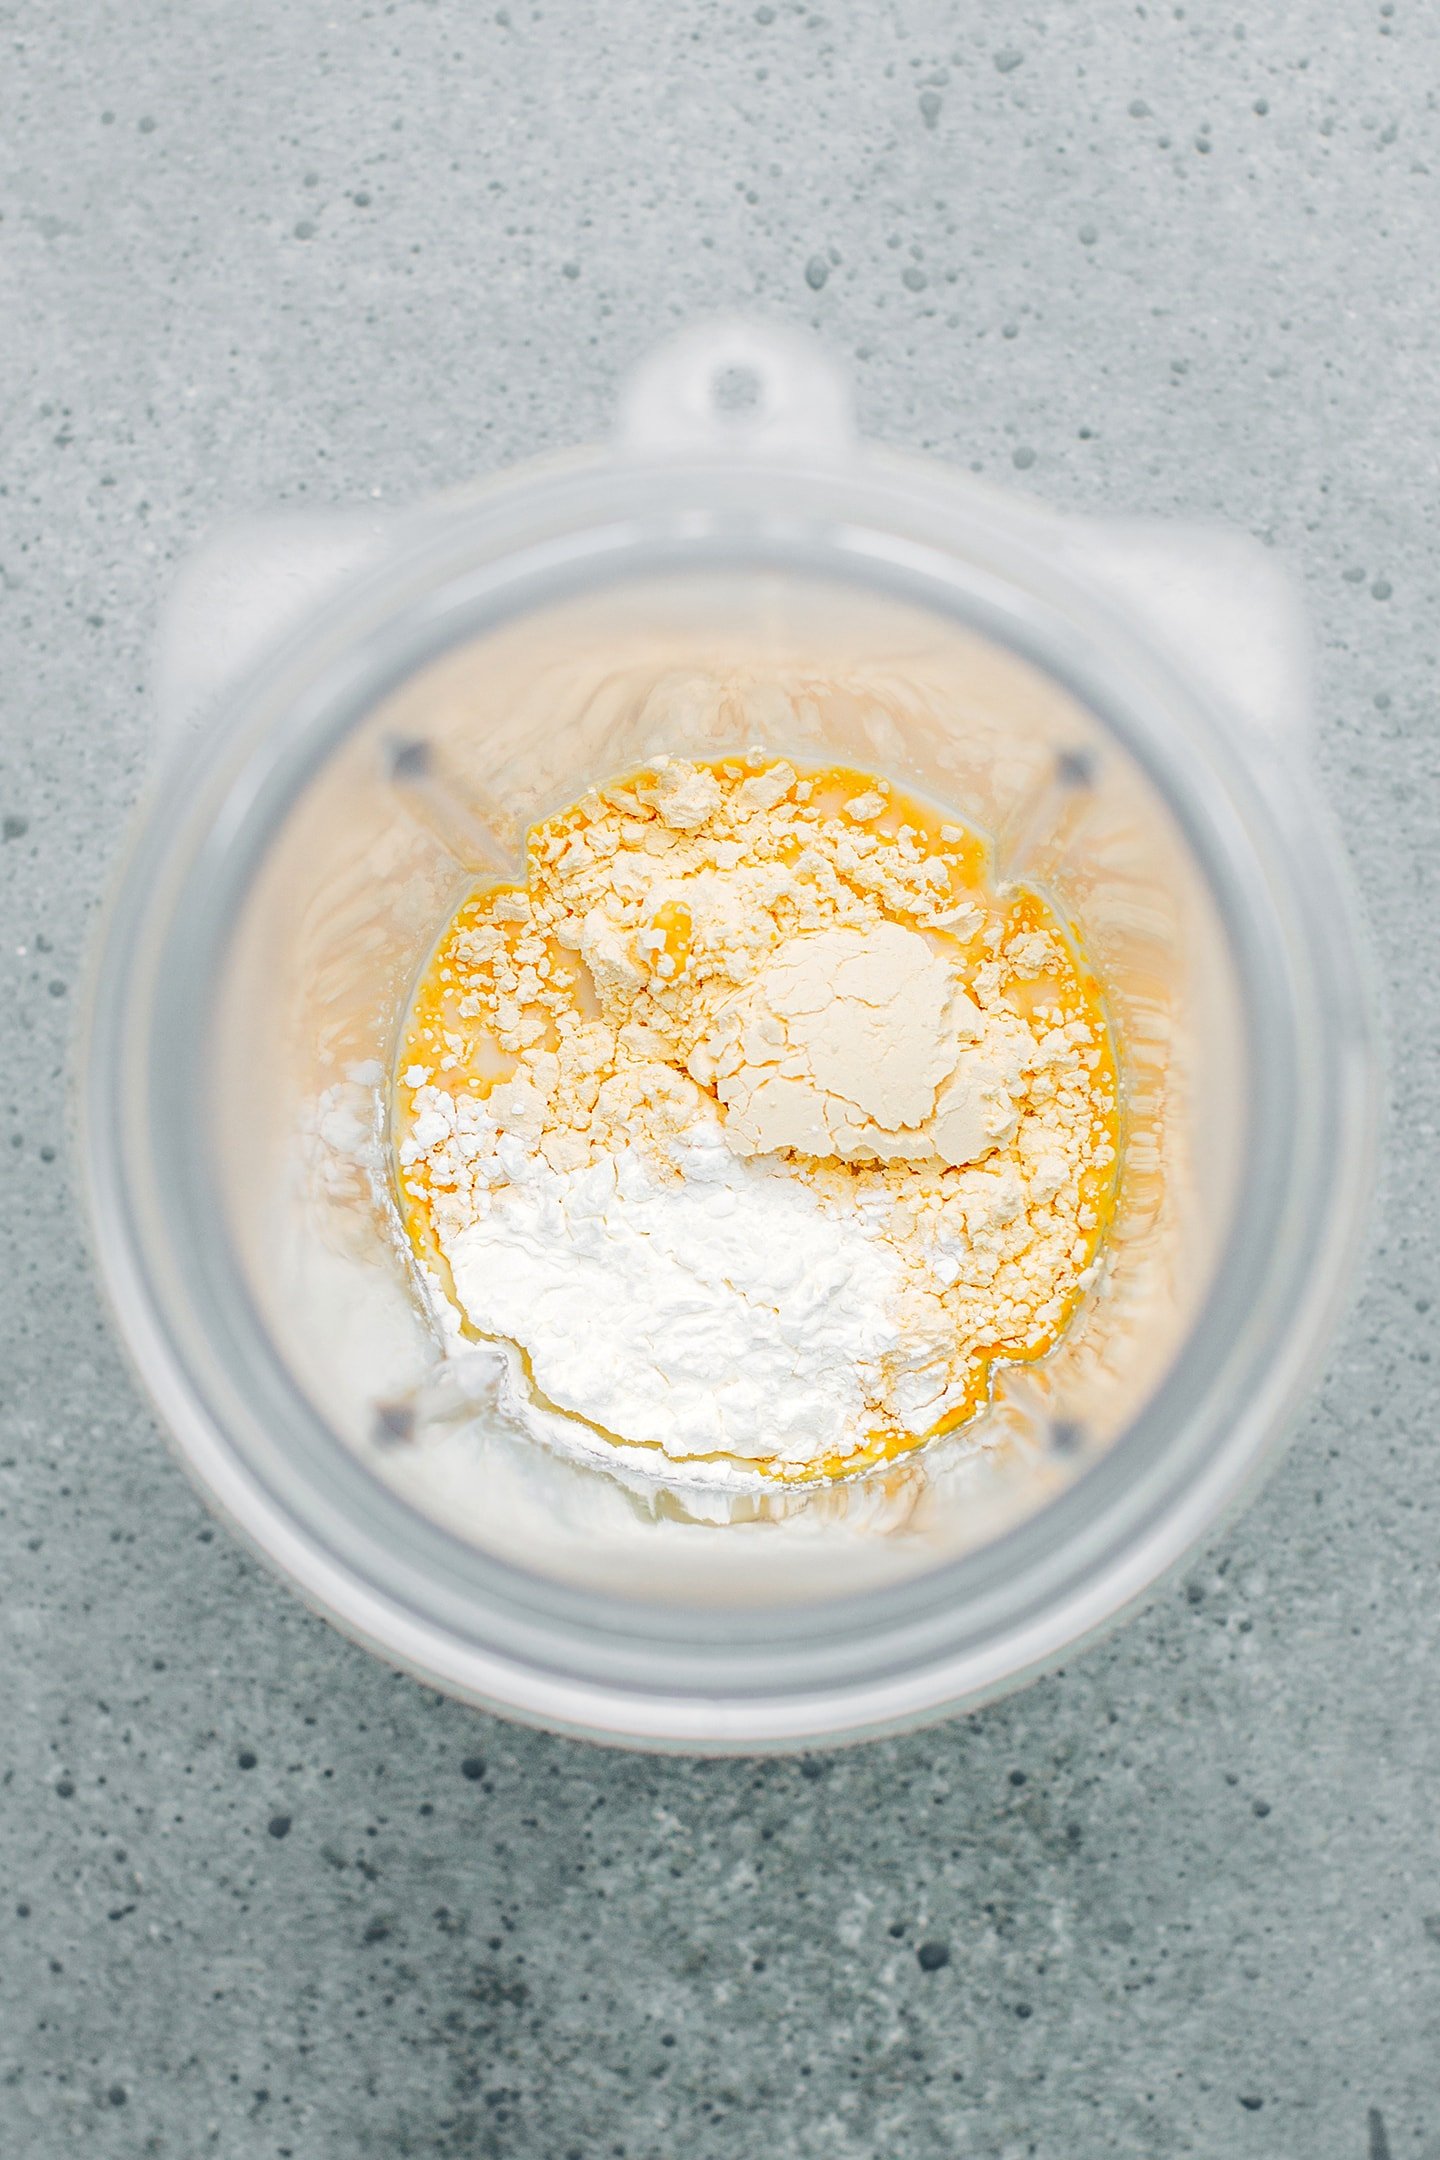 Almond milk and chickpea flour in a blender.